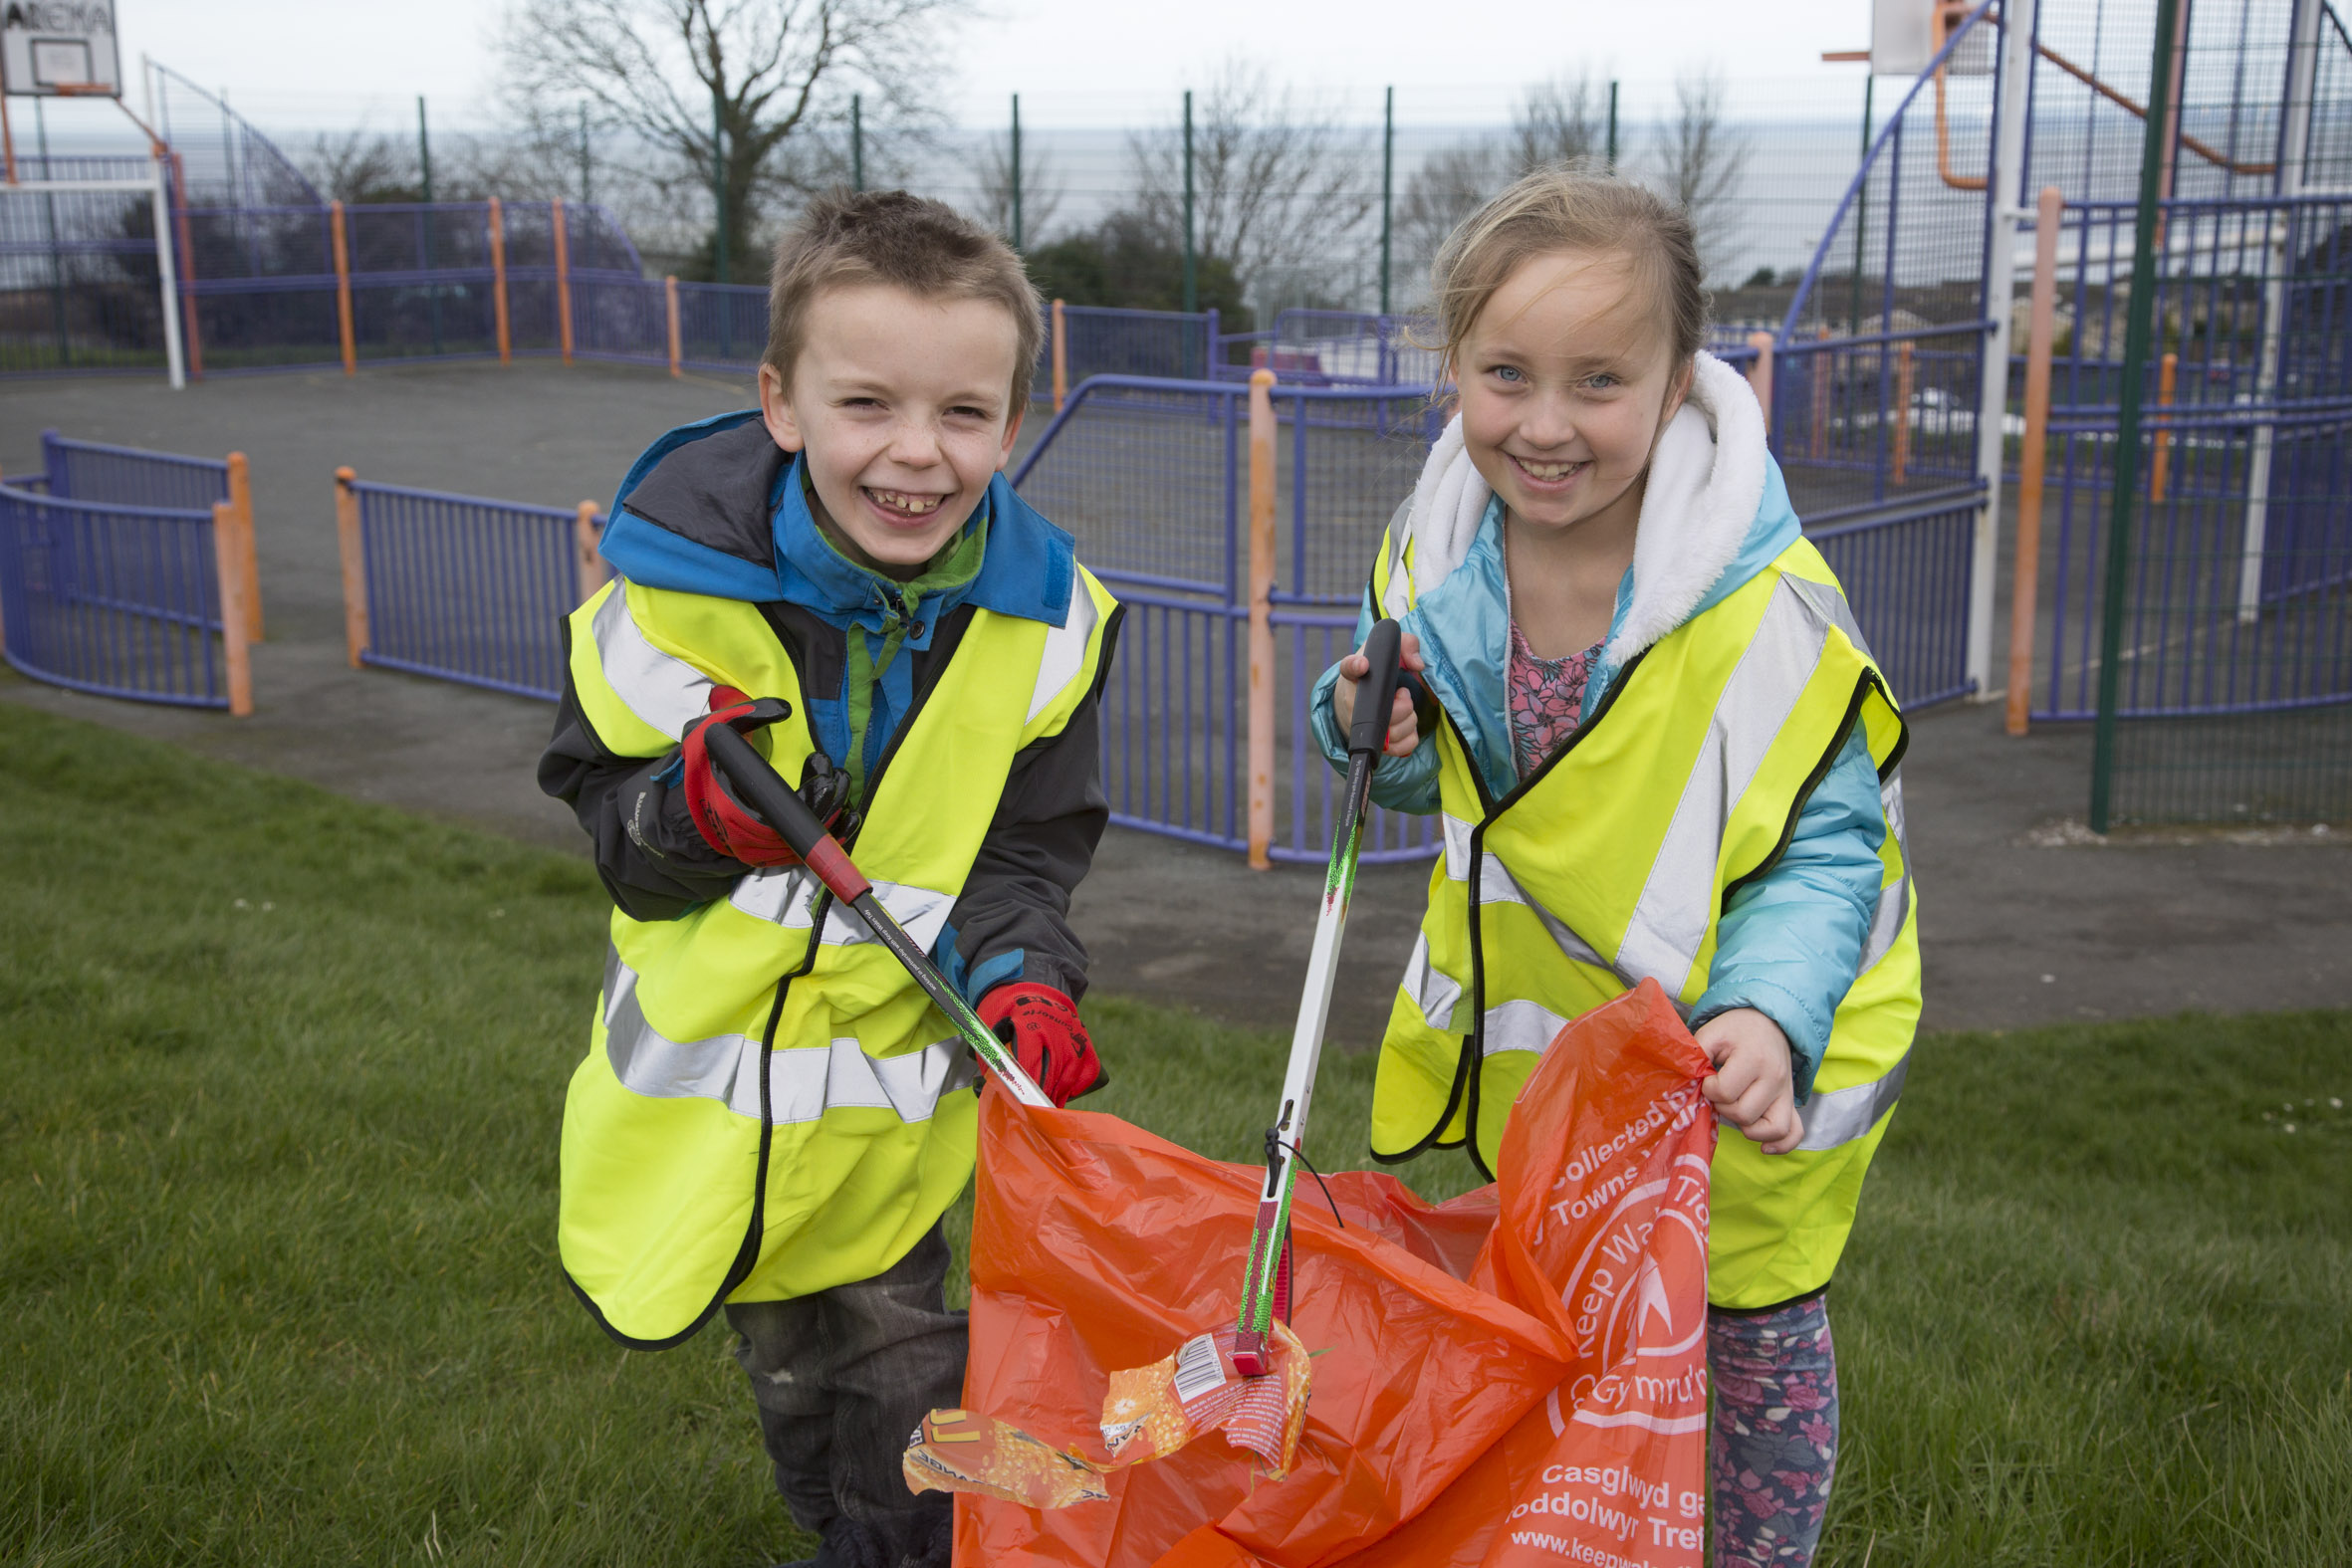 Community spirited pupils volunteer to help give their estate a spring clean